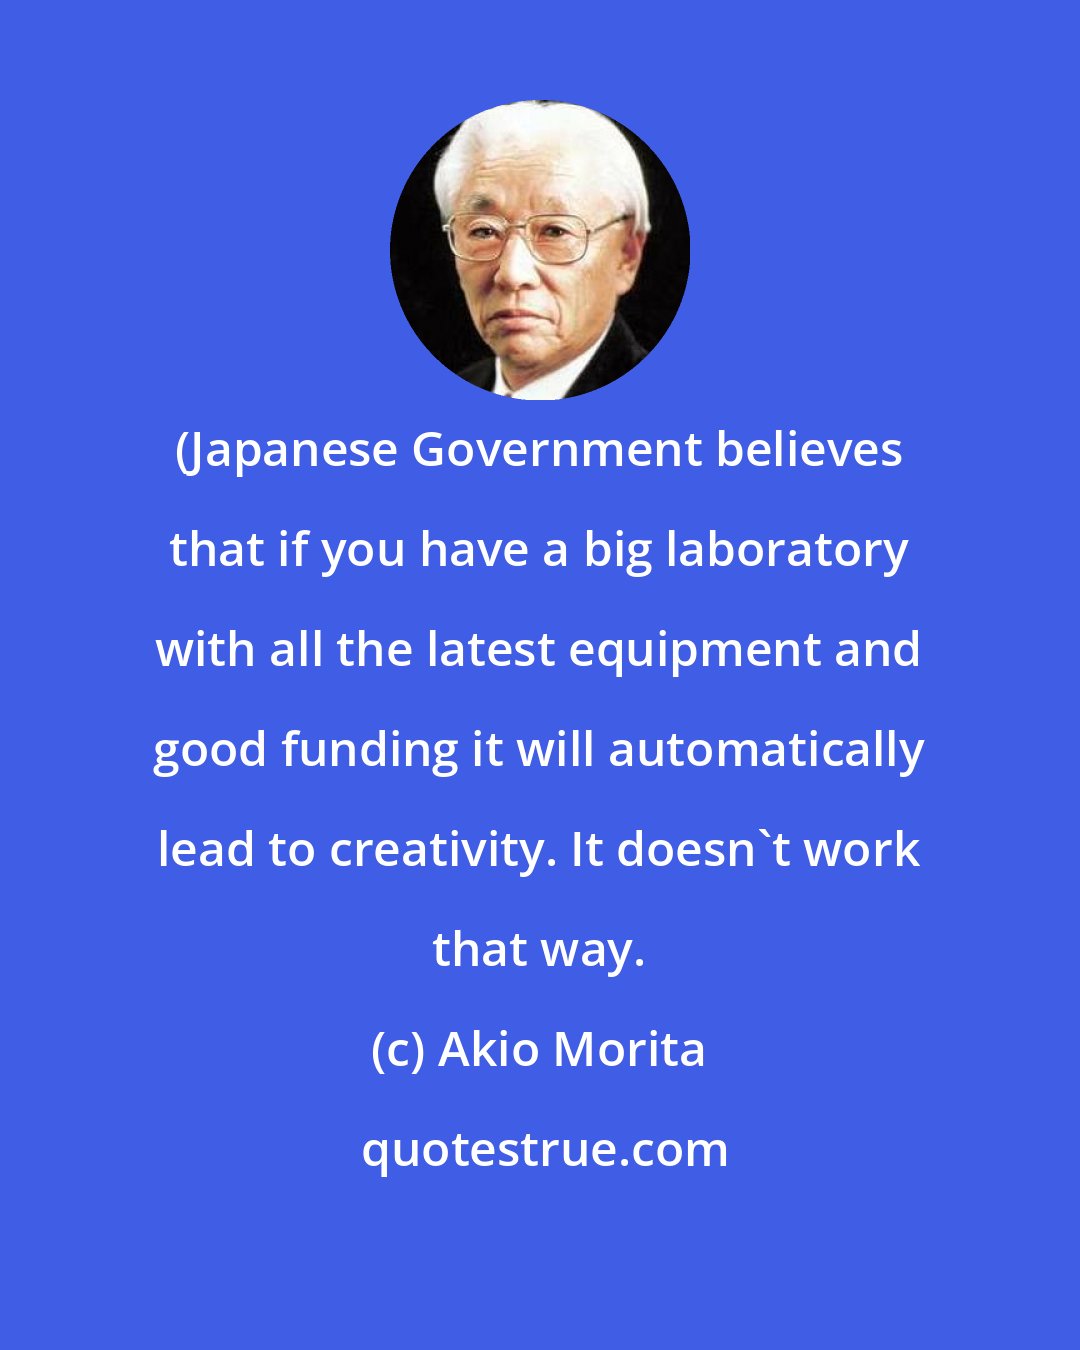 Akio Morita: (Japanese Government believes that if you have a big laboratory with all the latest equipment and good funding it will automatically lead to creativity. It doesn't work that way.